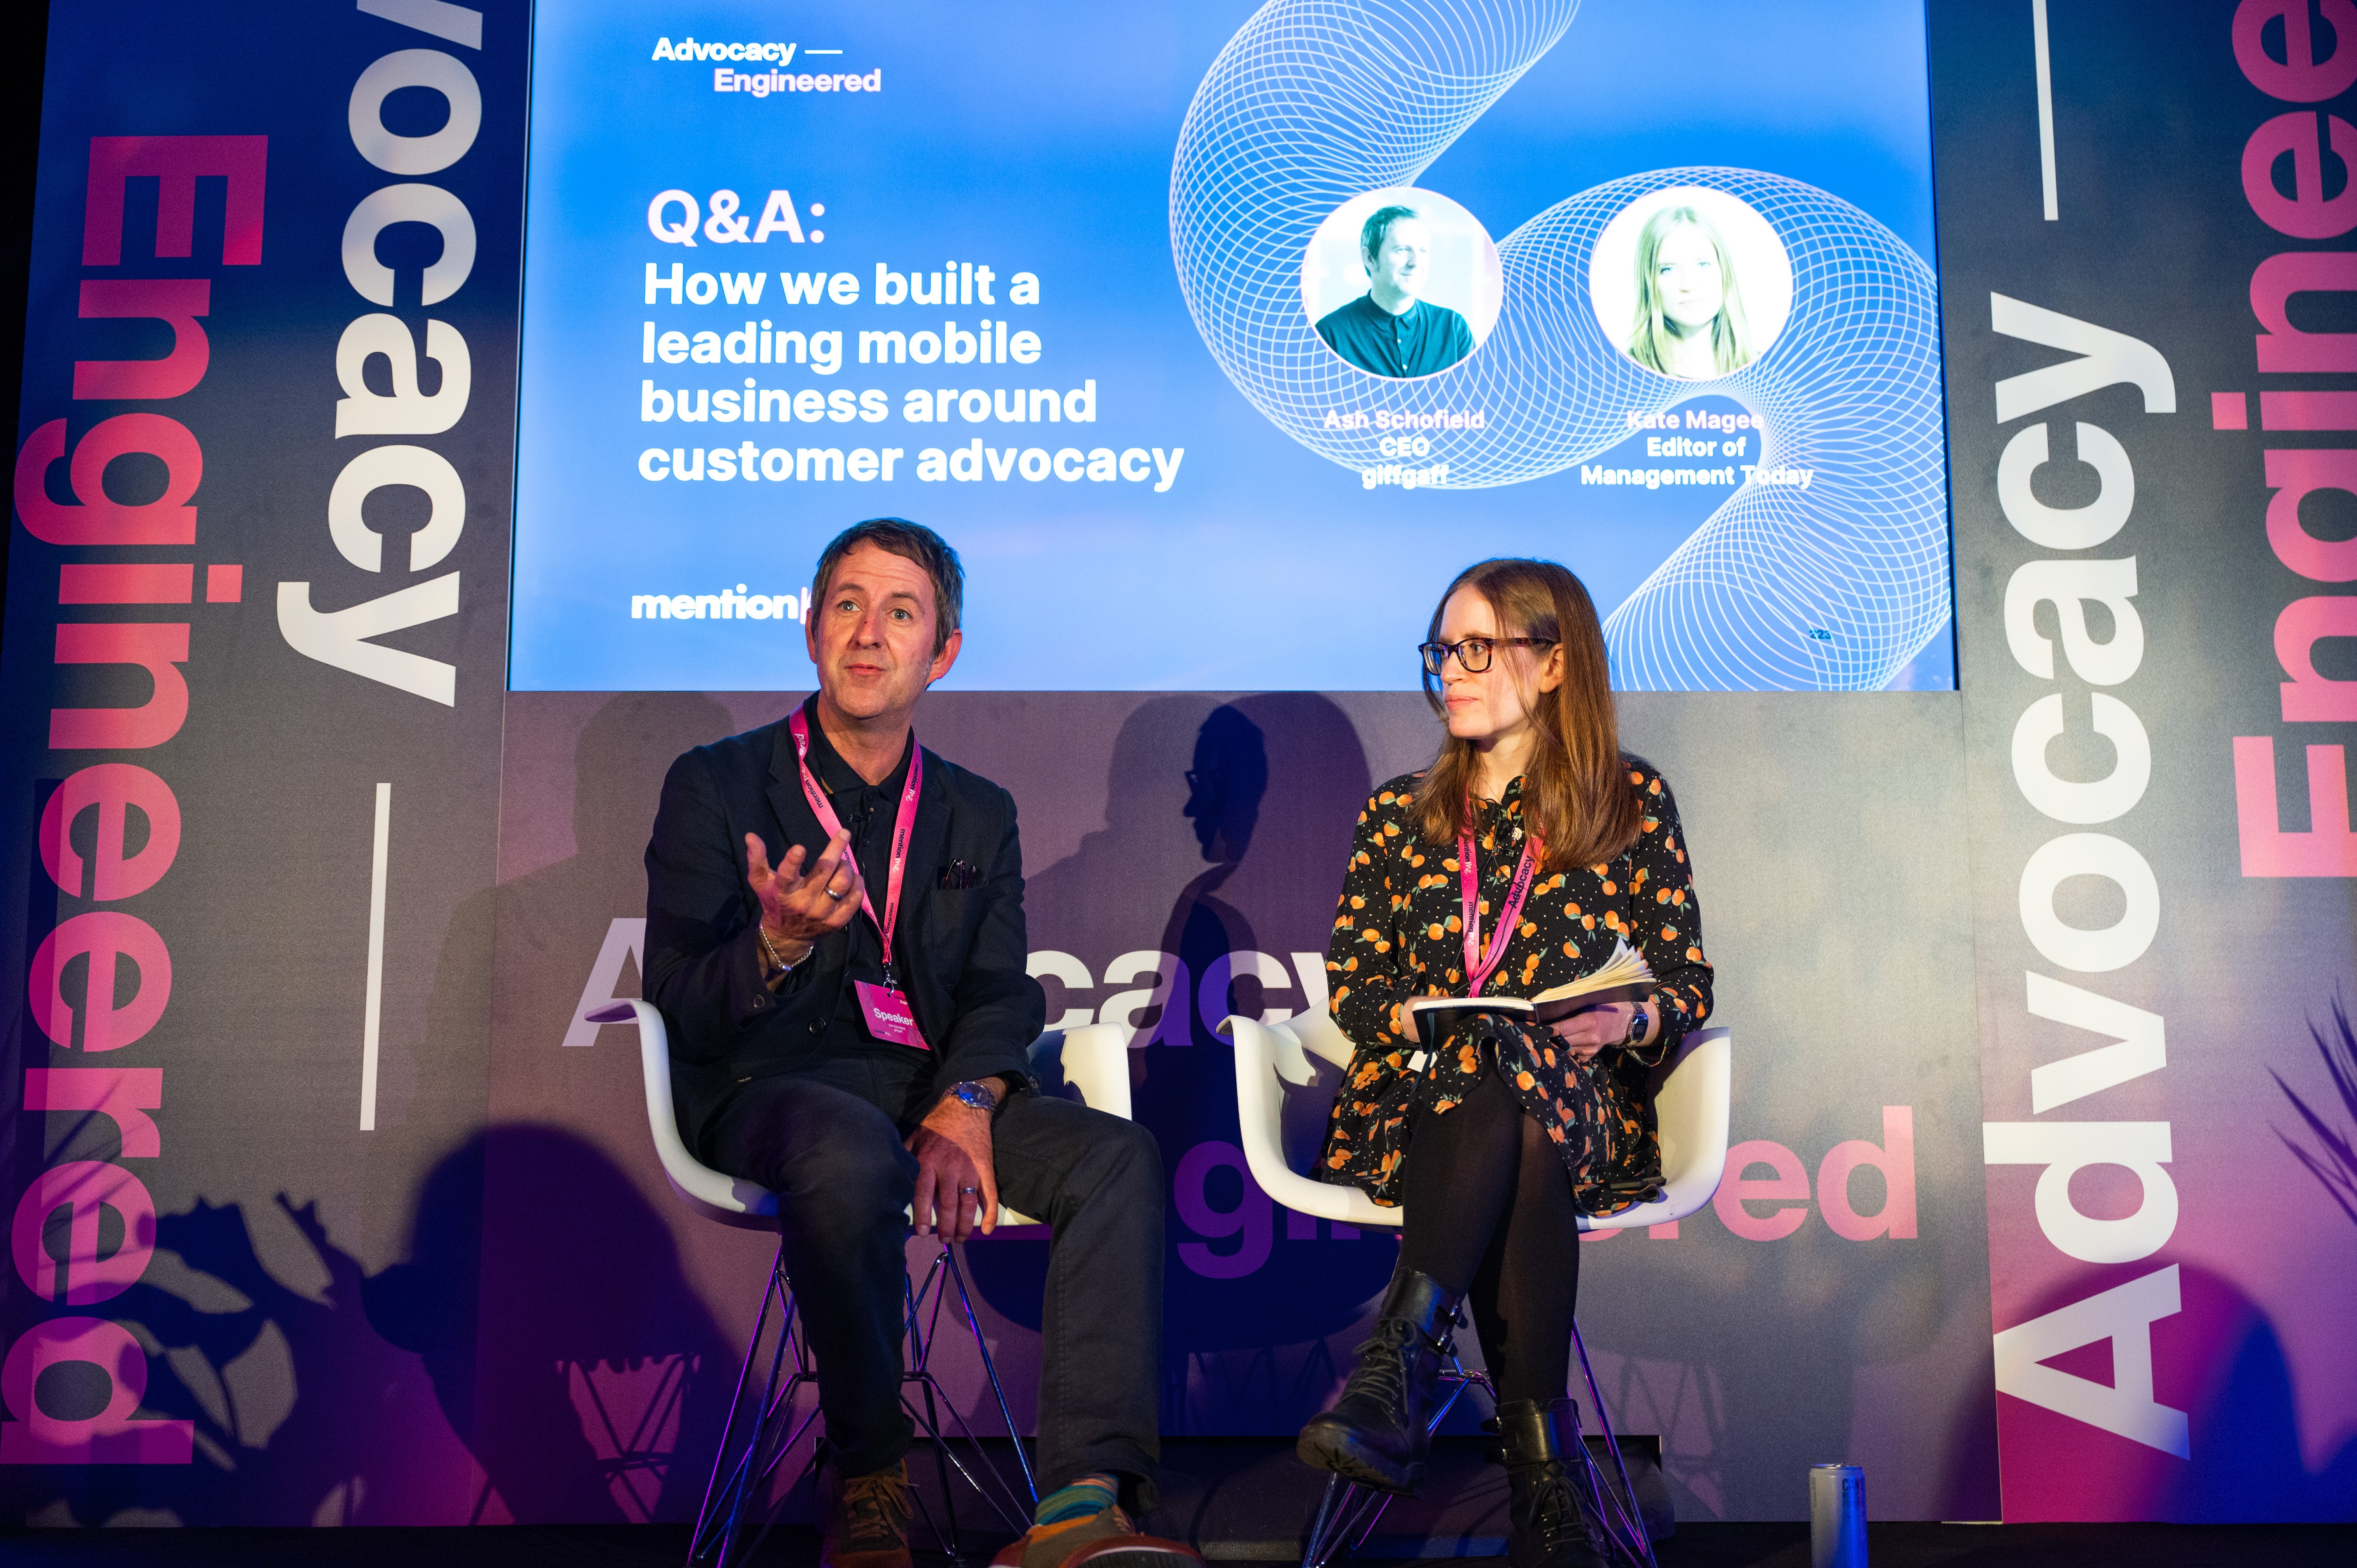 Ash Schofield, CEO at giffgaff, discusses his attitude towards customer advocacy with Kate Magee, editor of Management Today